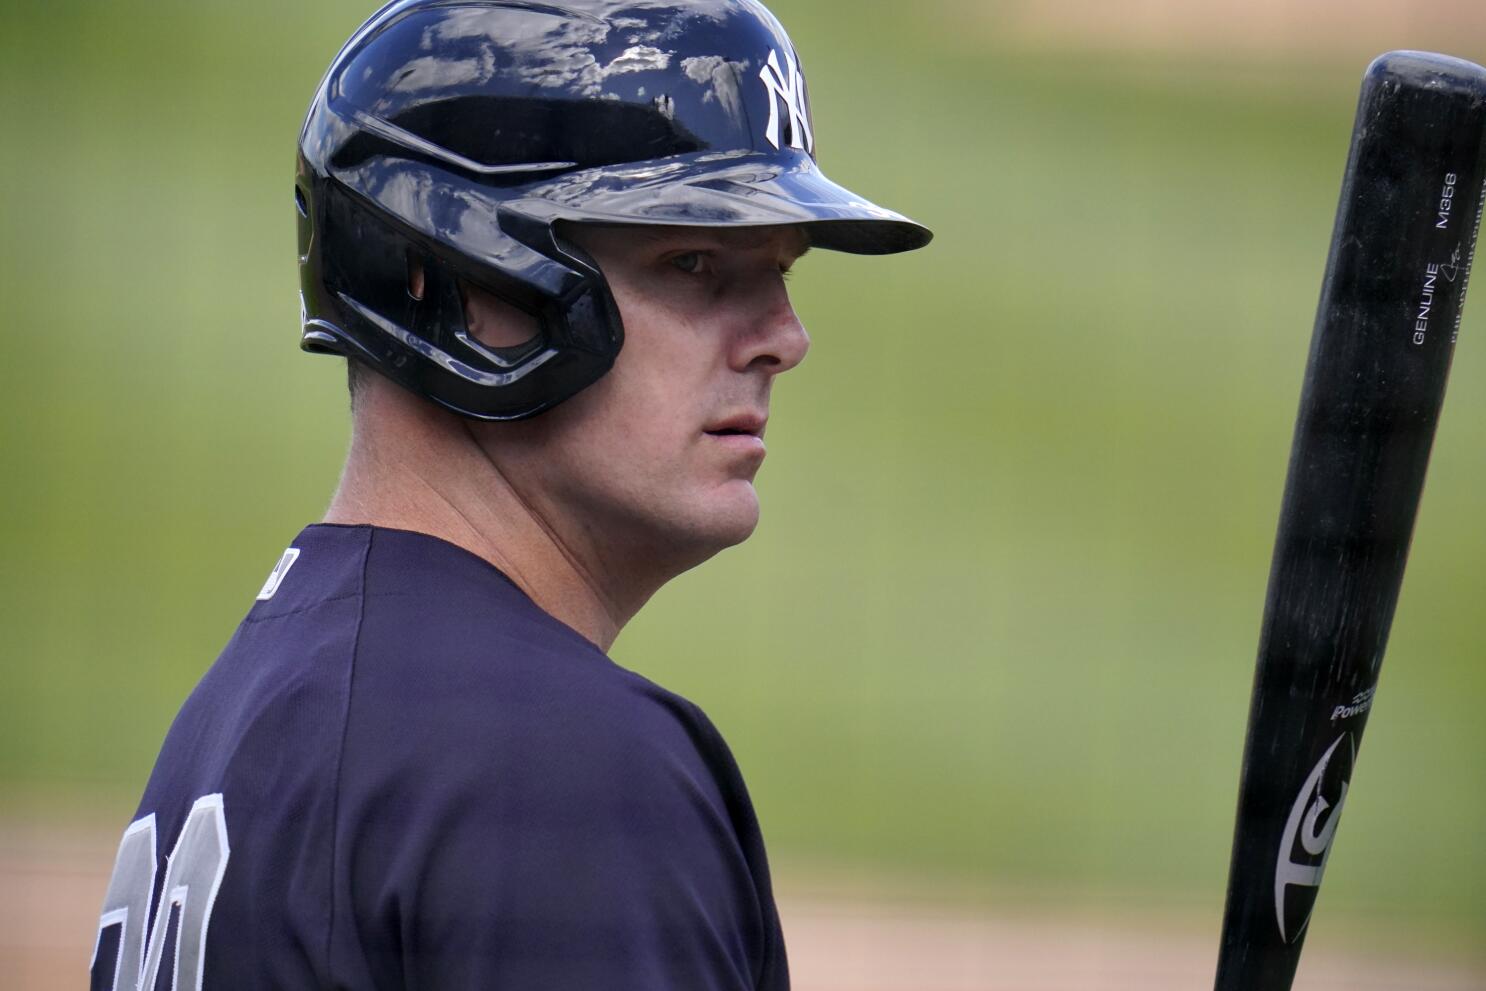 His spring training cut short with the Yankees, Josh Smith heads